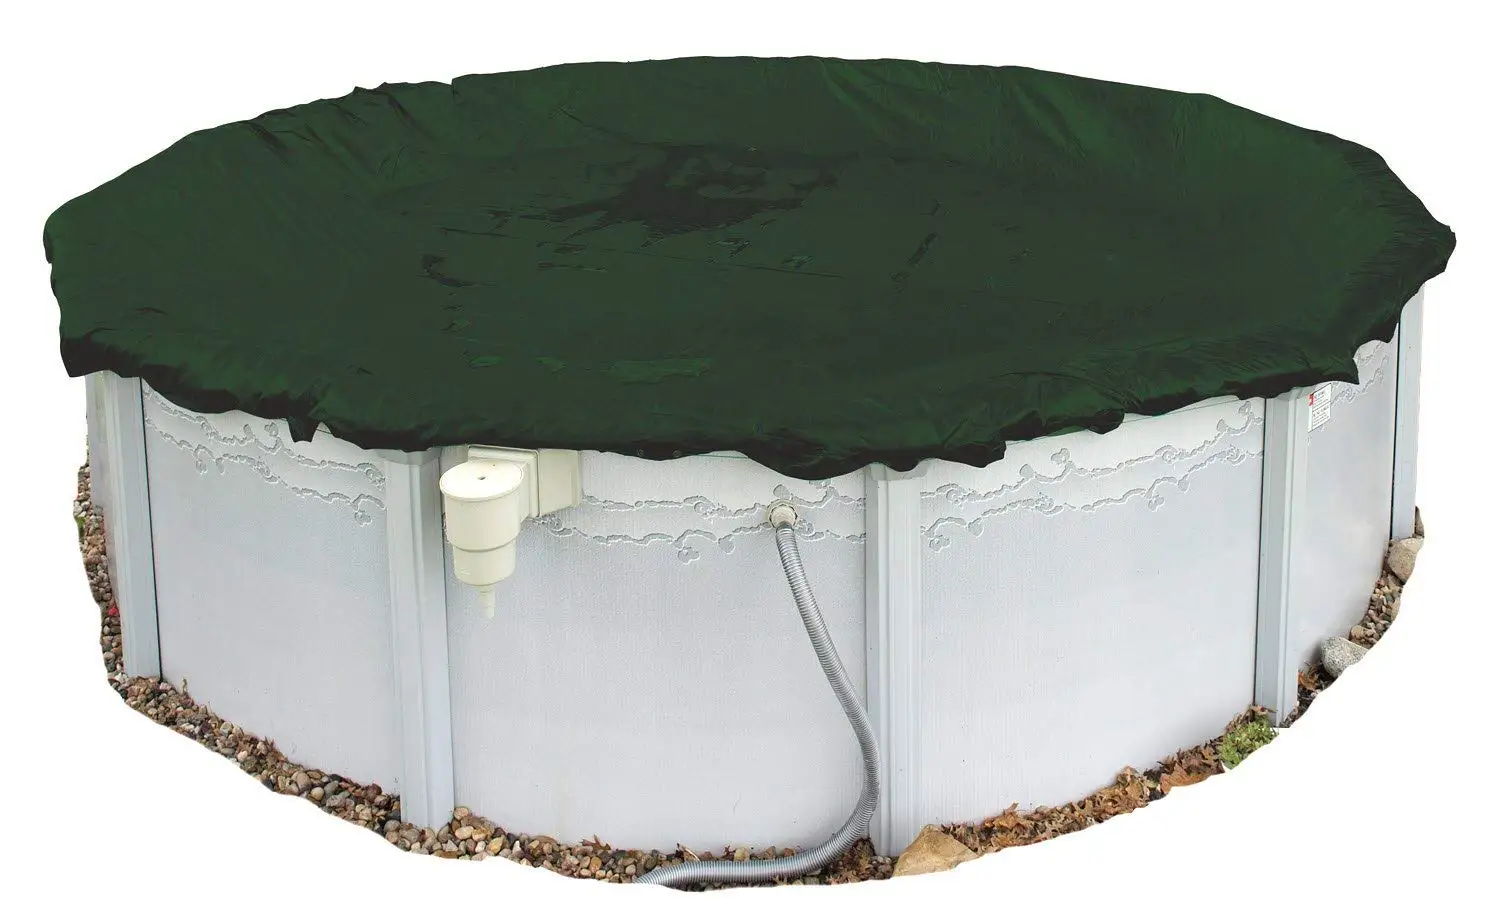 Buy 16x25 Blue Winter Oval Above Ground Swimming Pool Cover in Cheap Price on